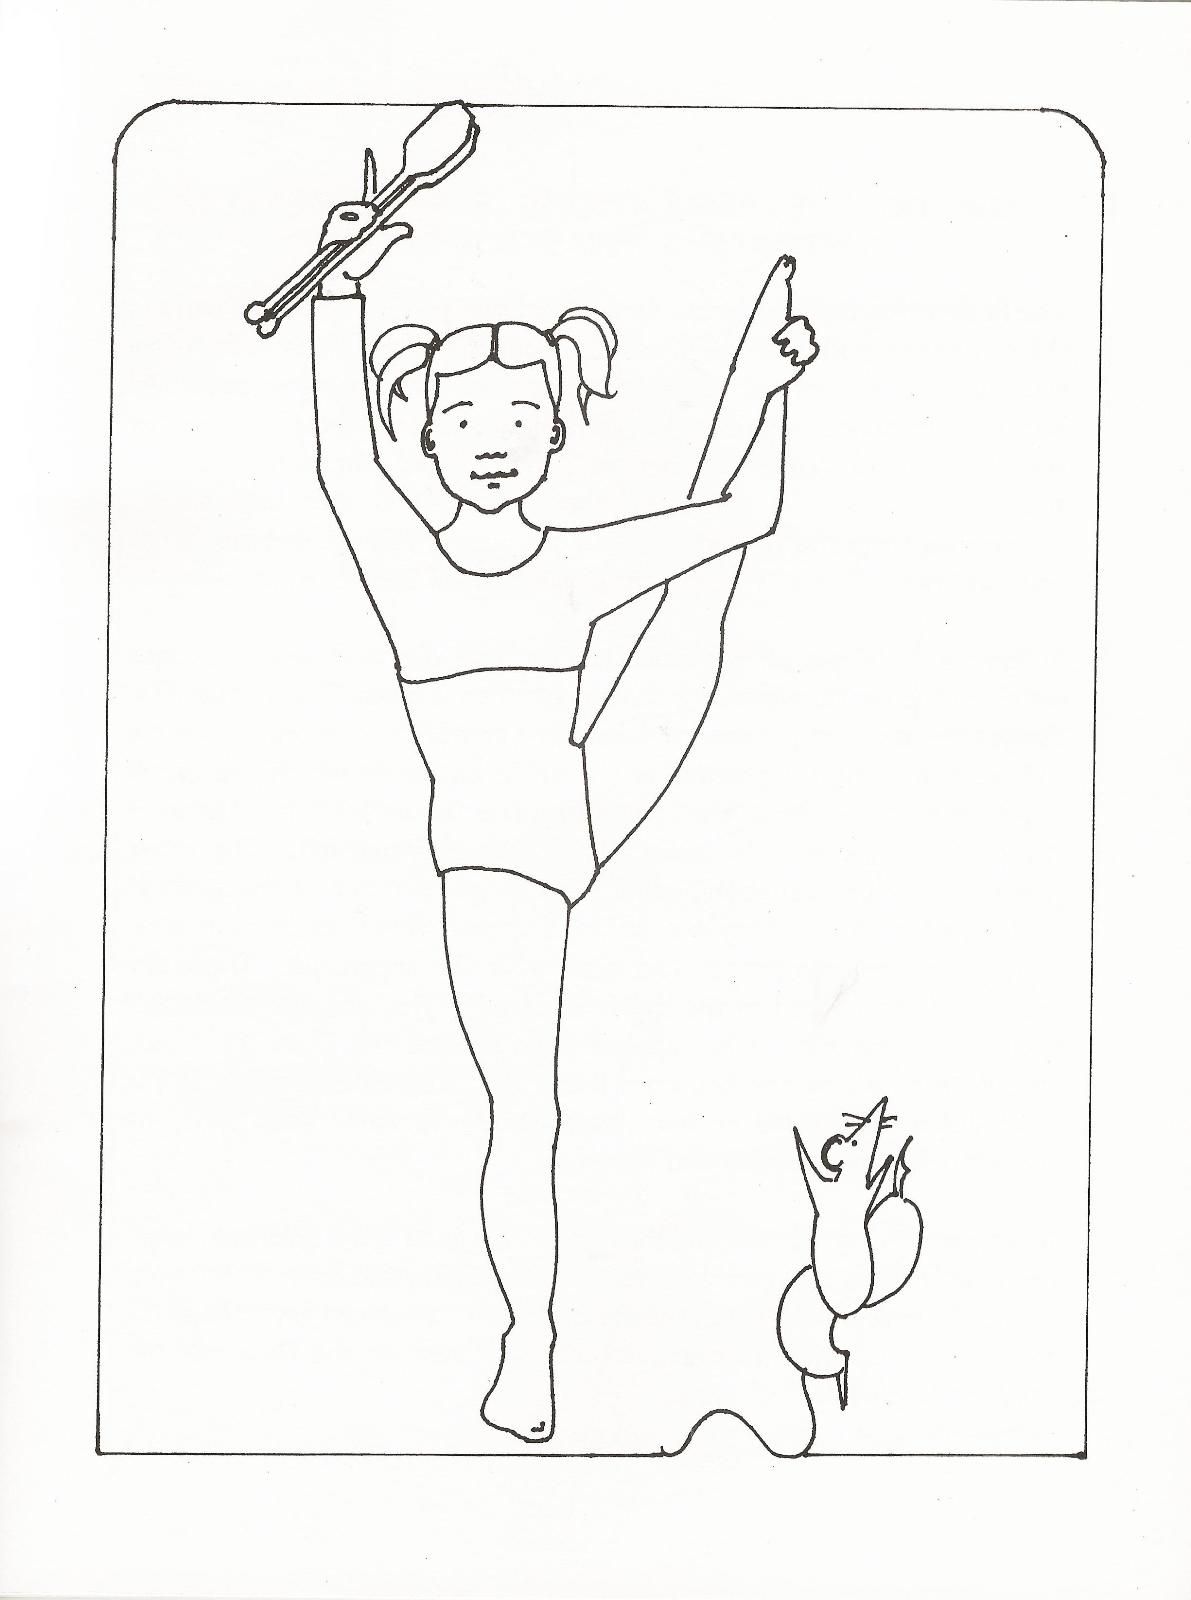 Related Gymnastics Coloring Pages item-7165, Gymnastics Coloring ...